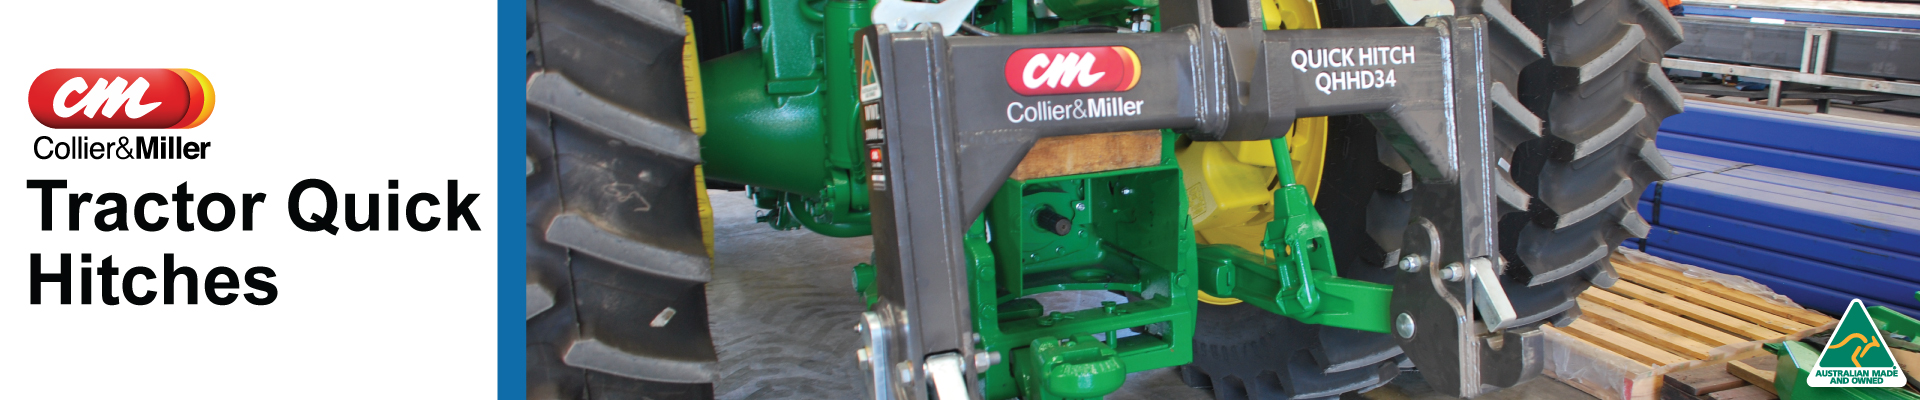 <br>
<p>Collier &amp; Miller&rsquo;s heavy duty Tractor Quick Hitches are designed to increase on-farm productivity when changing three-point linkage implements. Designed and manufactured in NSW, Australia our quality hitches offer a safe, reliable and efficient method for switching over linkage mounted attachments.</p>